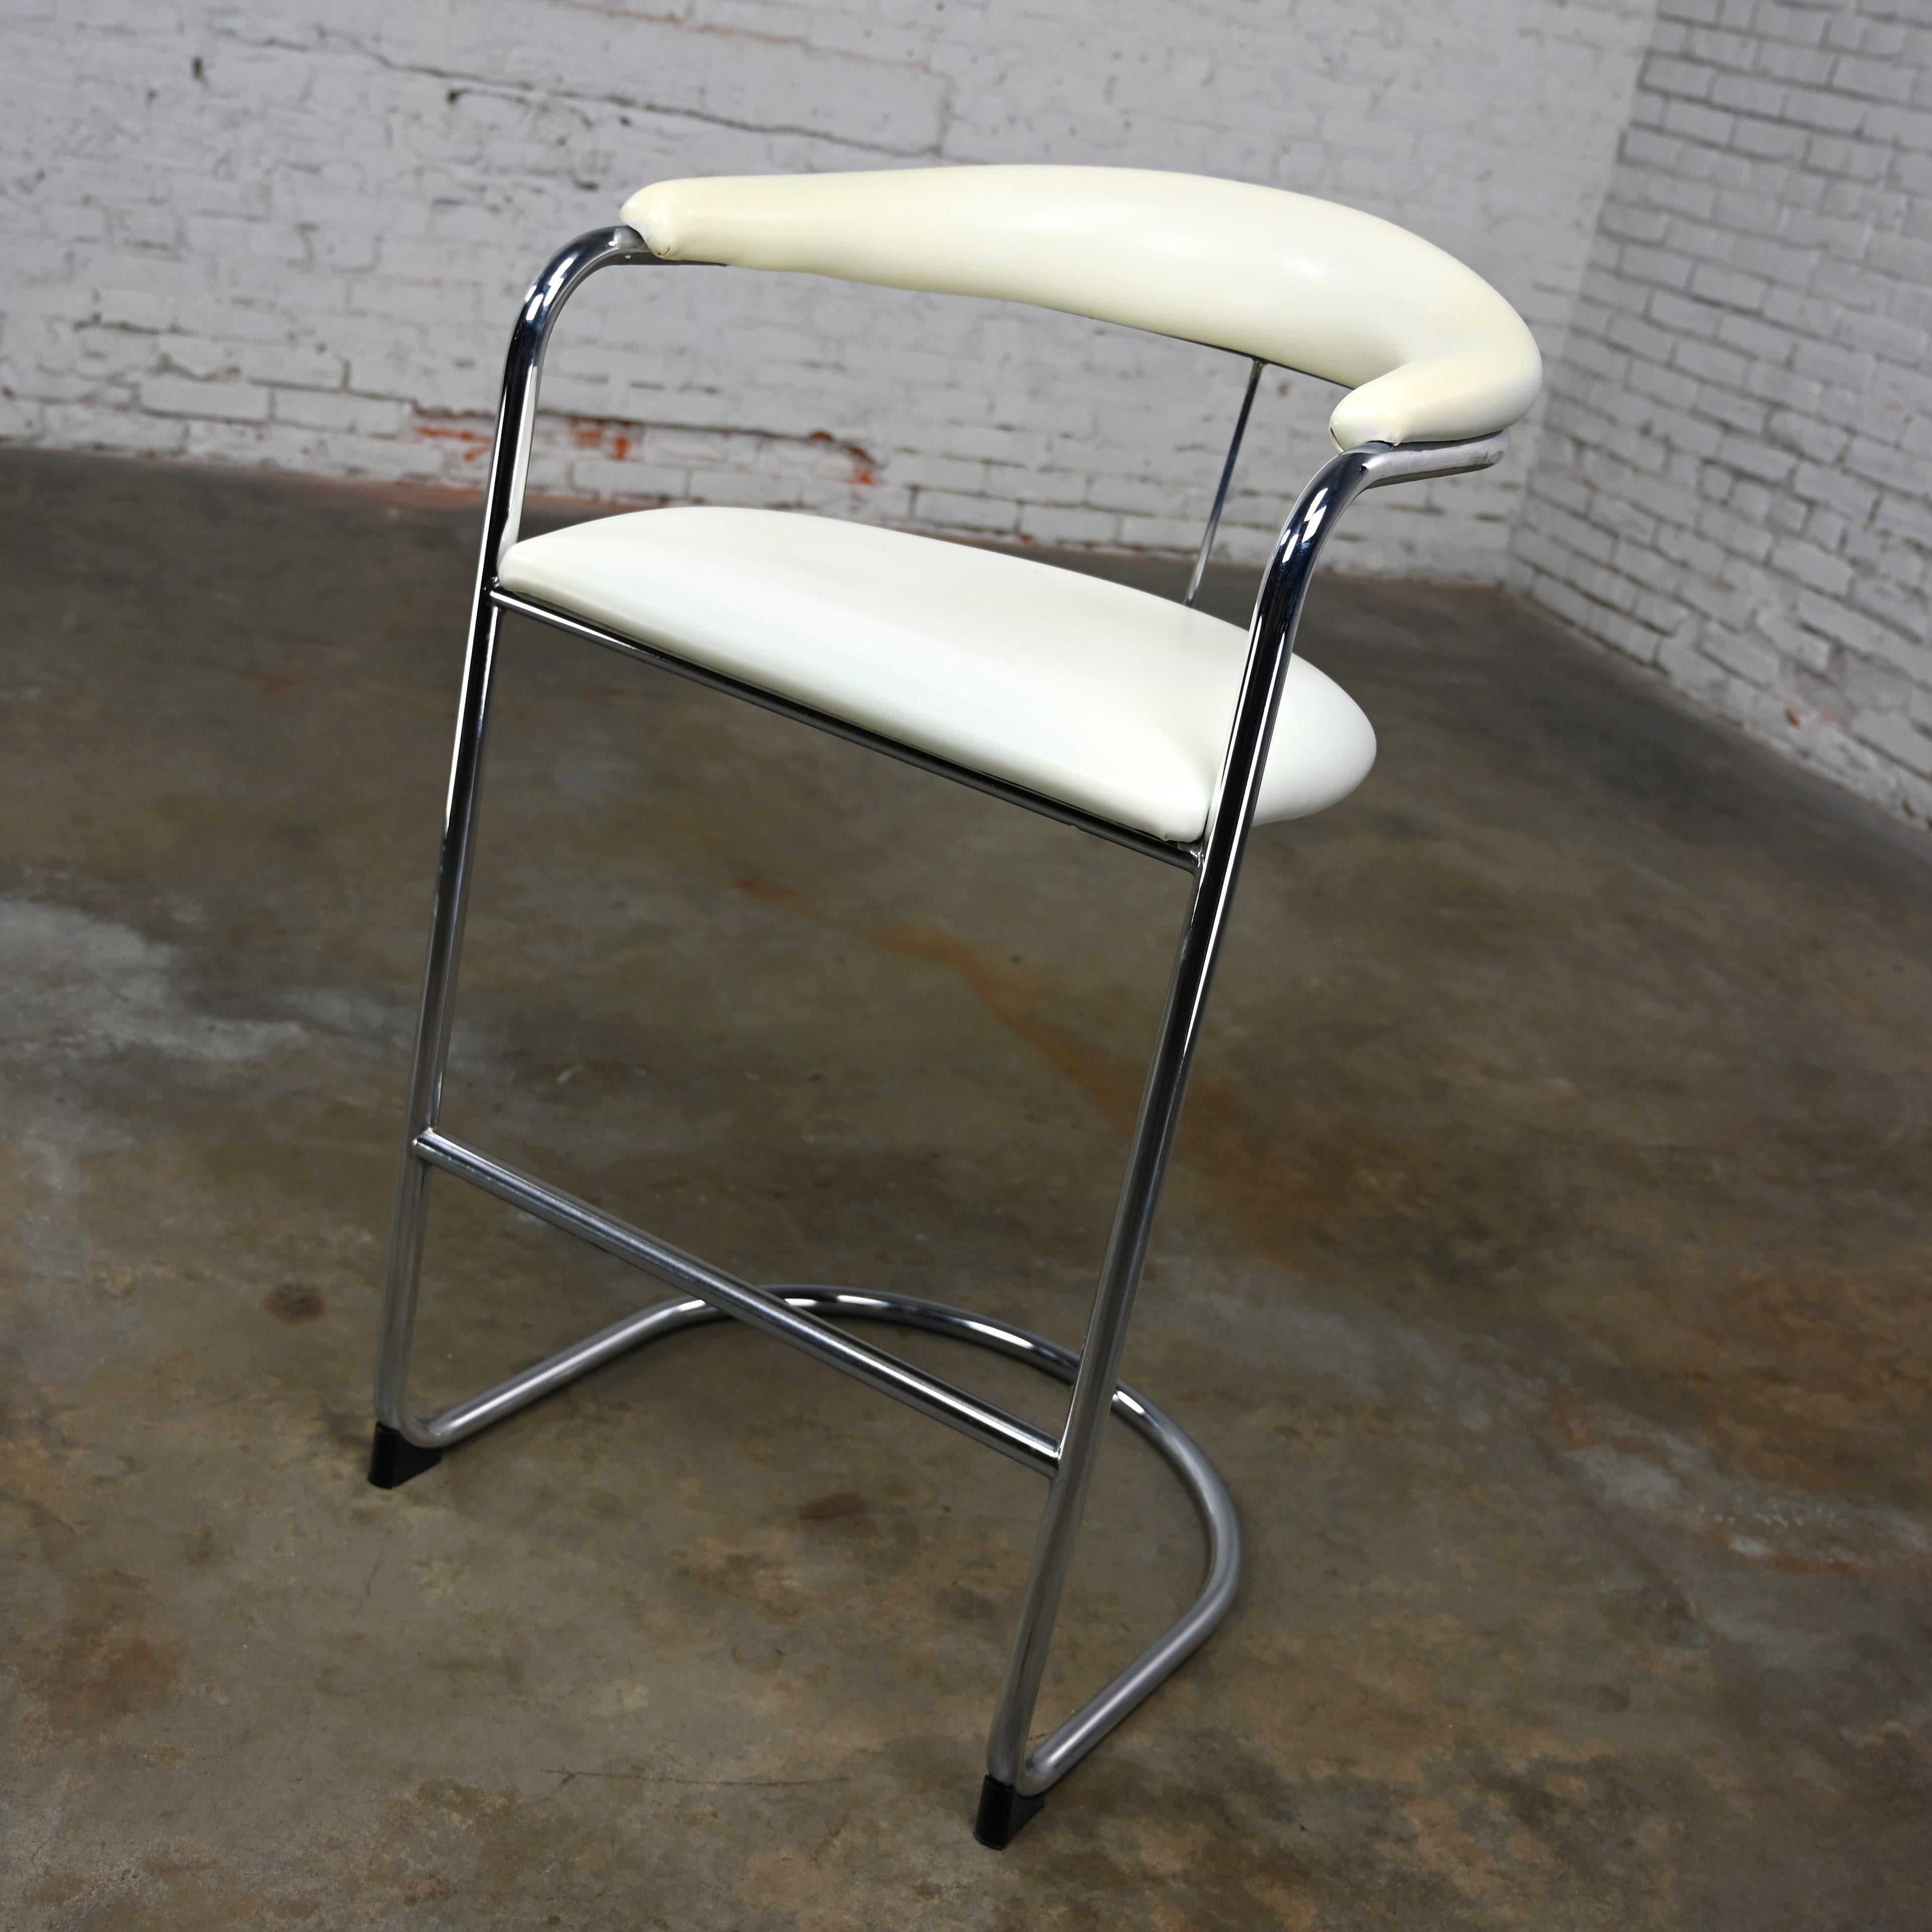 Fabulous vintage white vinyl & chrome tube barstool by Thonet Model SS33 Bauhaus cantilever chair by Anton Lorenz. This piece is tagged Thonet but has been attributed to Anton Lorenz based upon archived research including online sources, vintage